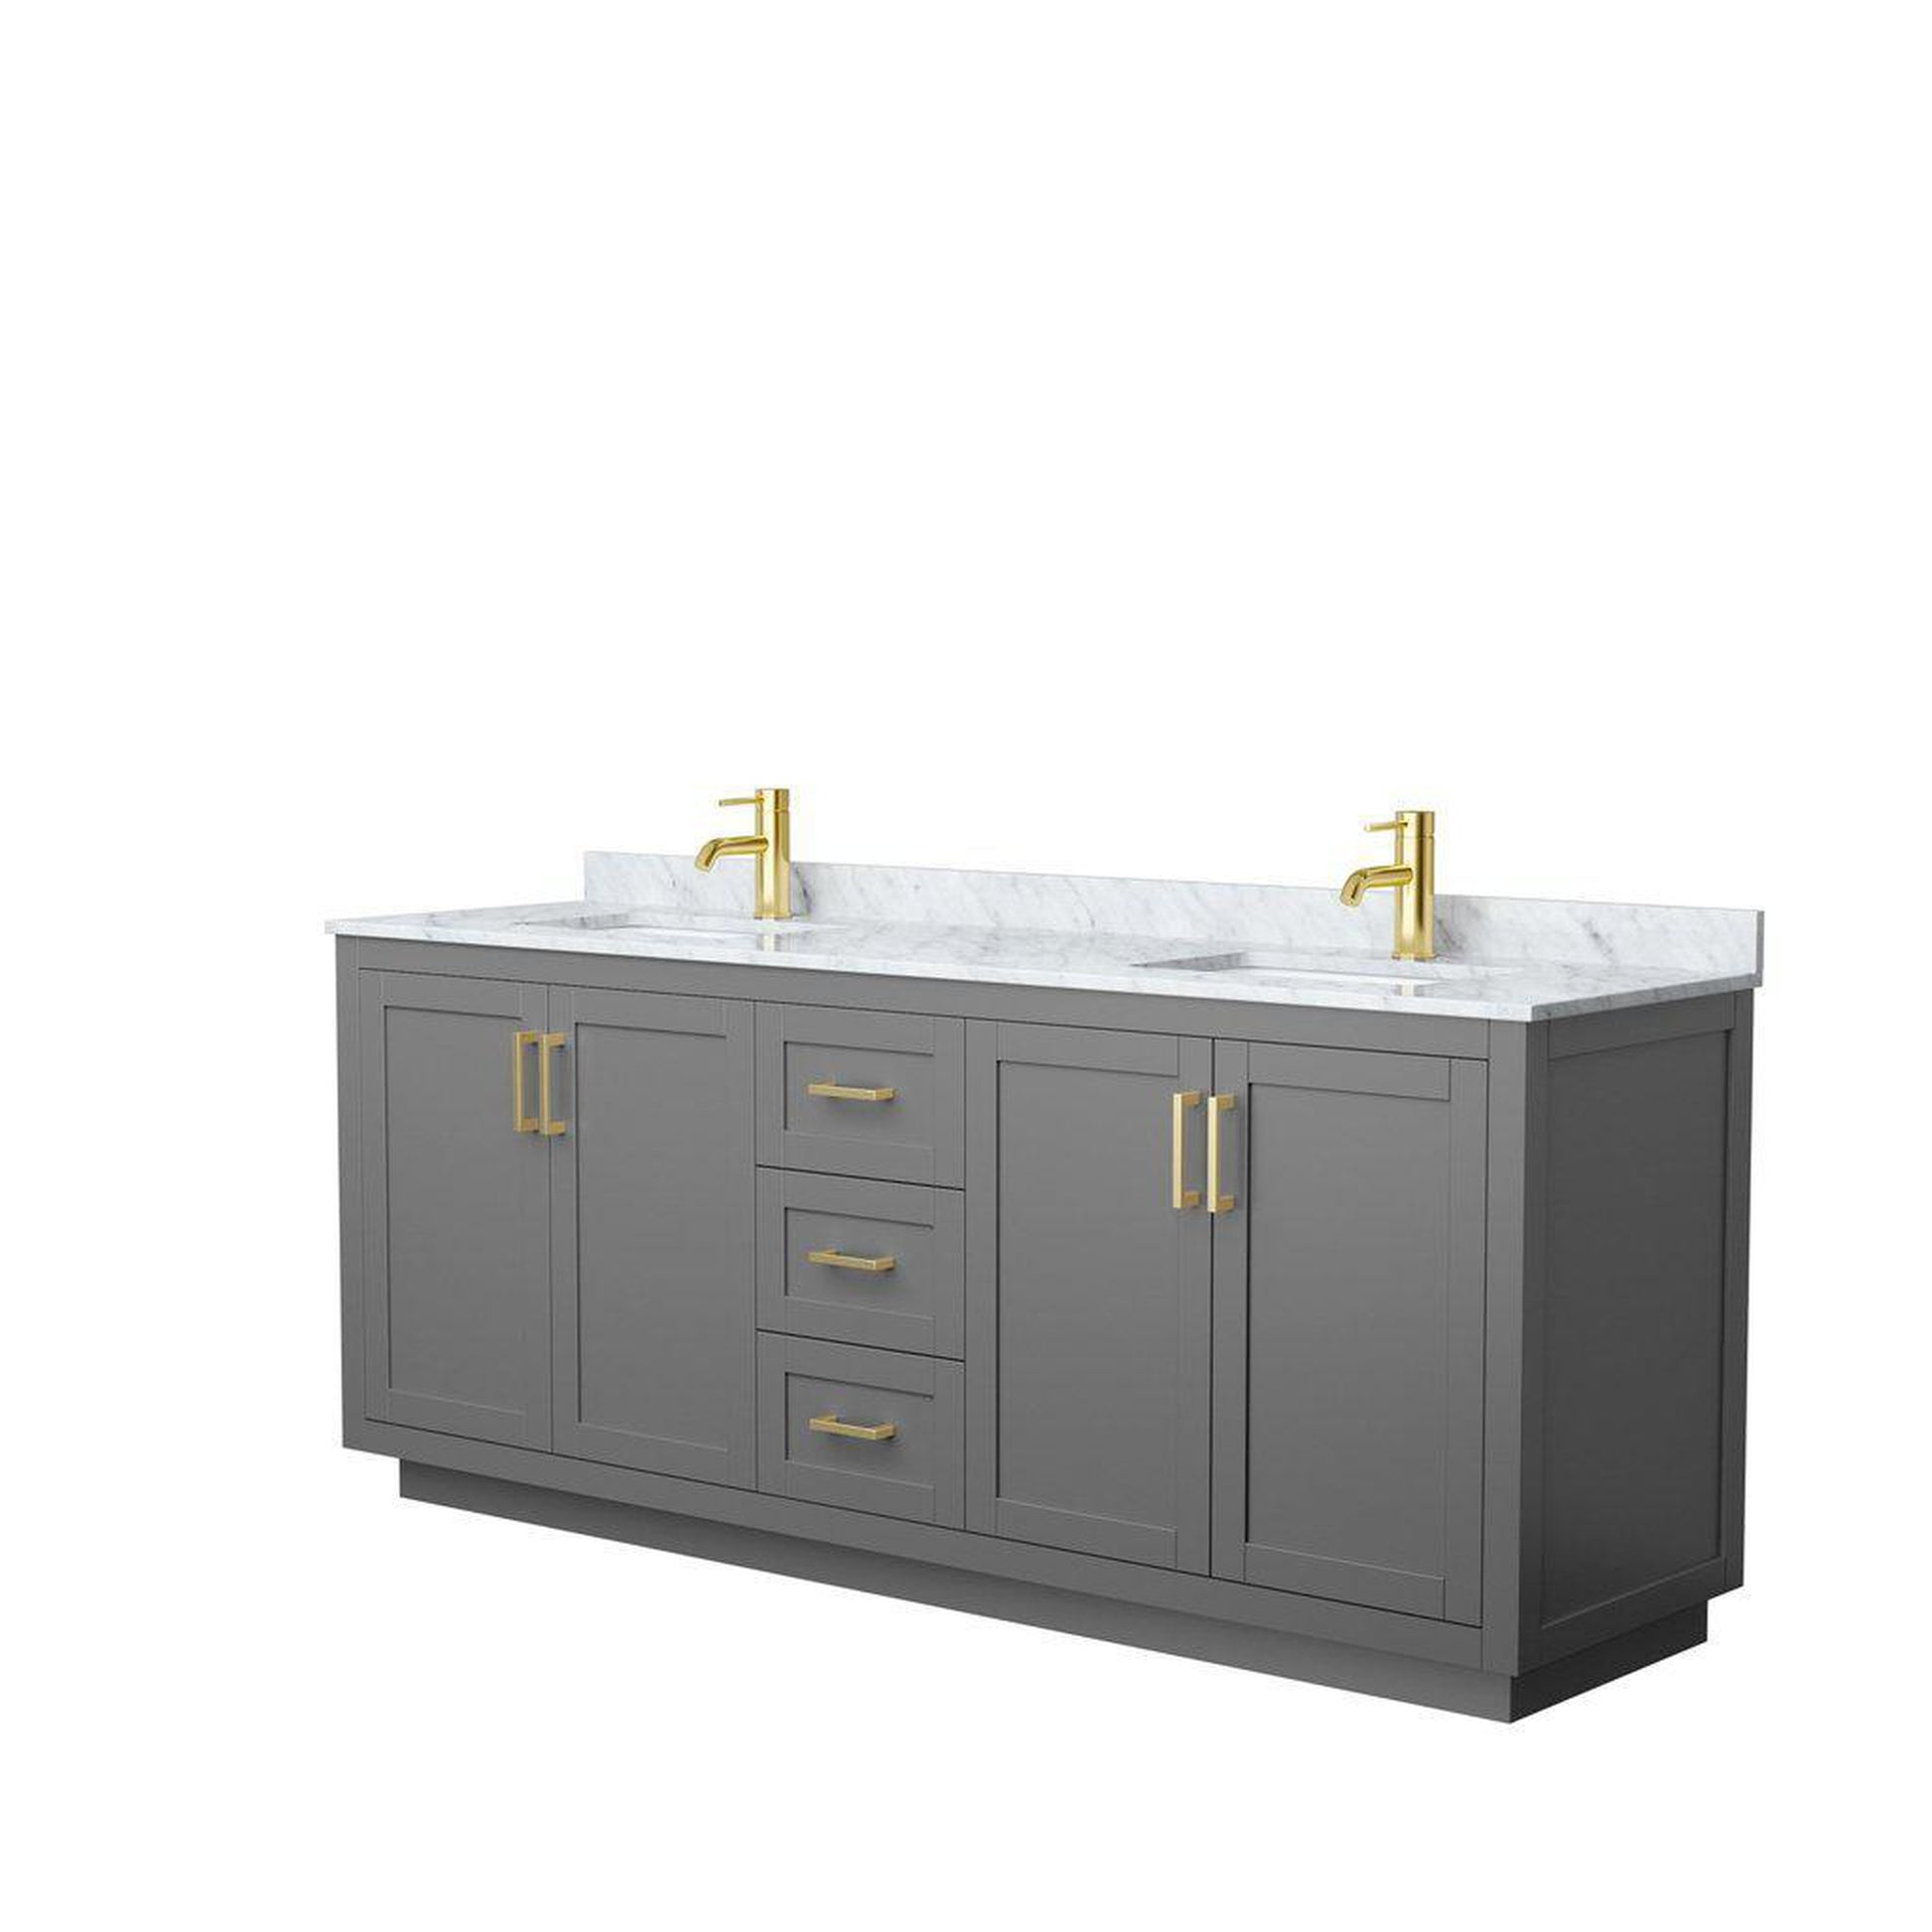 Wyndham Collection Miranda 80" Double Bathroom Dark Gray Vanity Set With White Carrara Marble Countertop, Undermount Square Sink, And Brushed Gold Trim